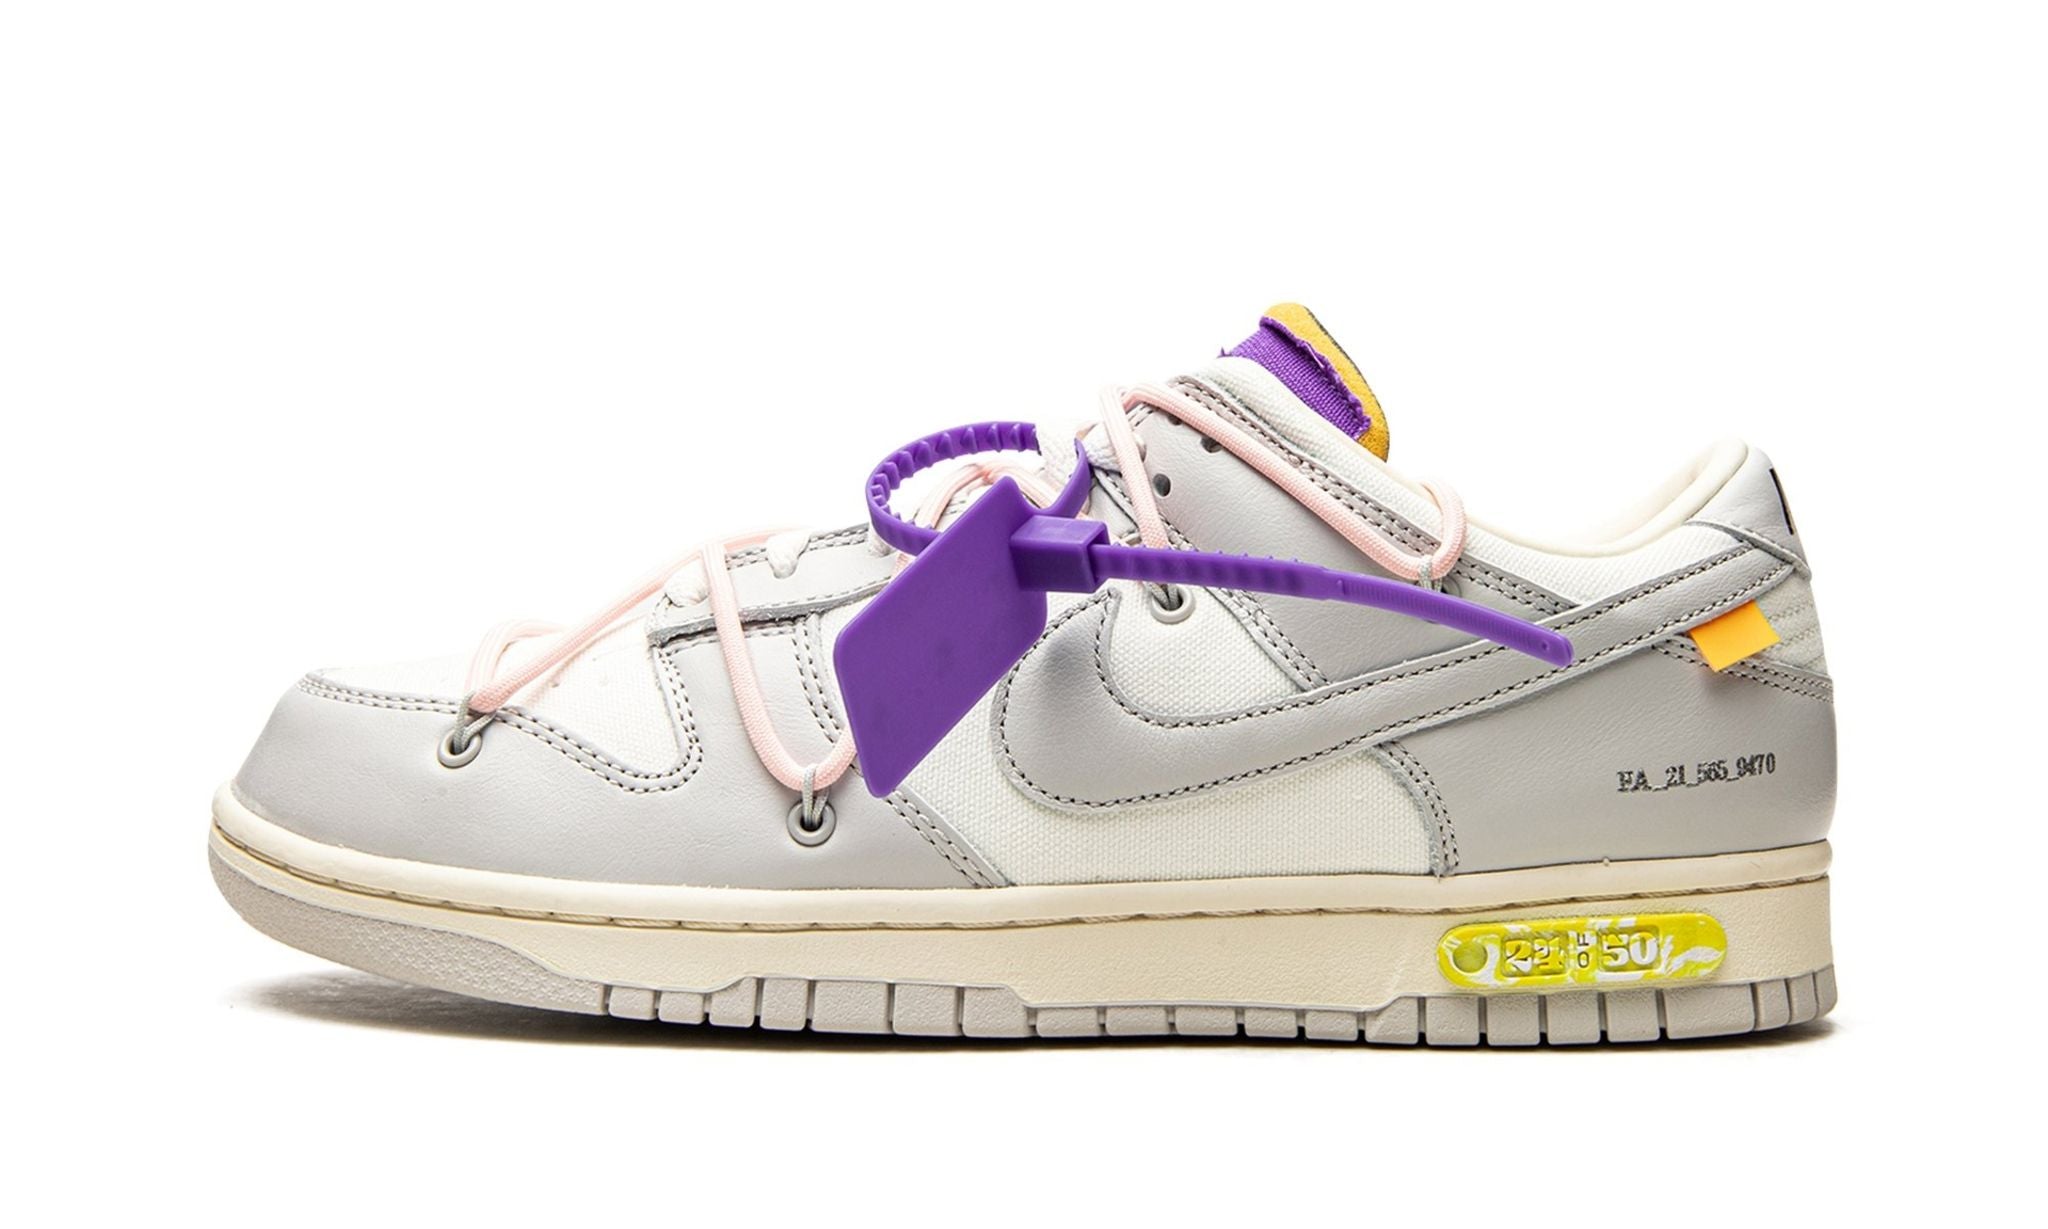 Nike X Off-White Dunk Low "Off-White - Lot 24"